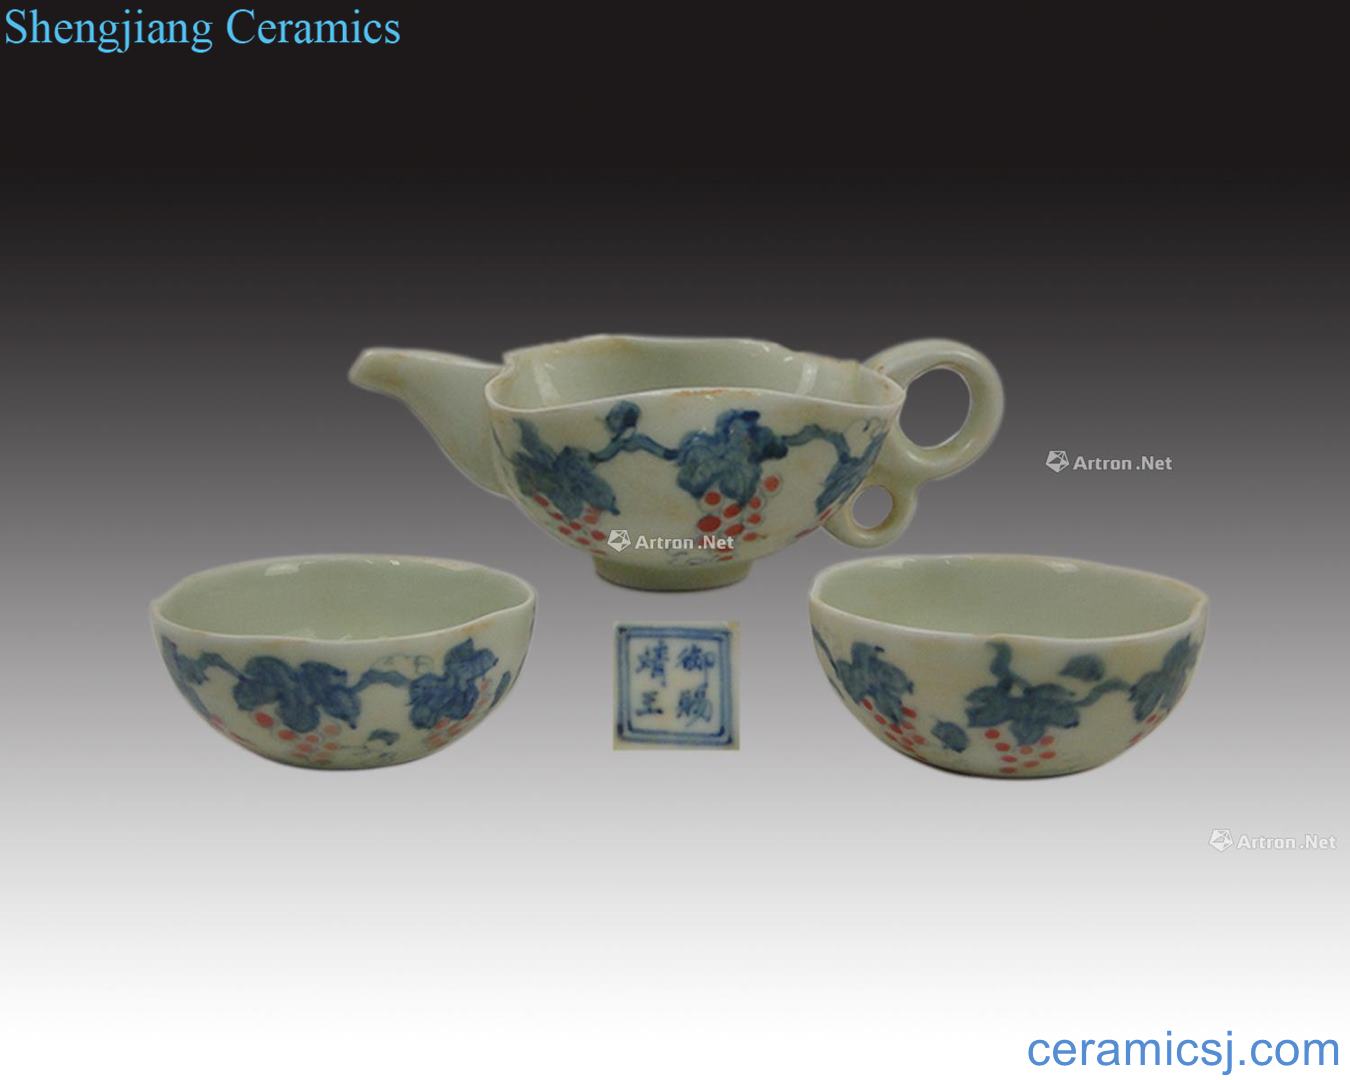 Wang "in the Ming dynasty" royal give jing dou color tea set (a)